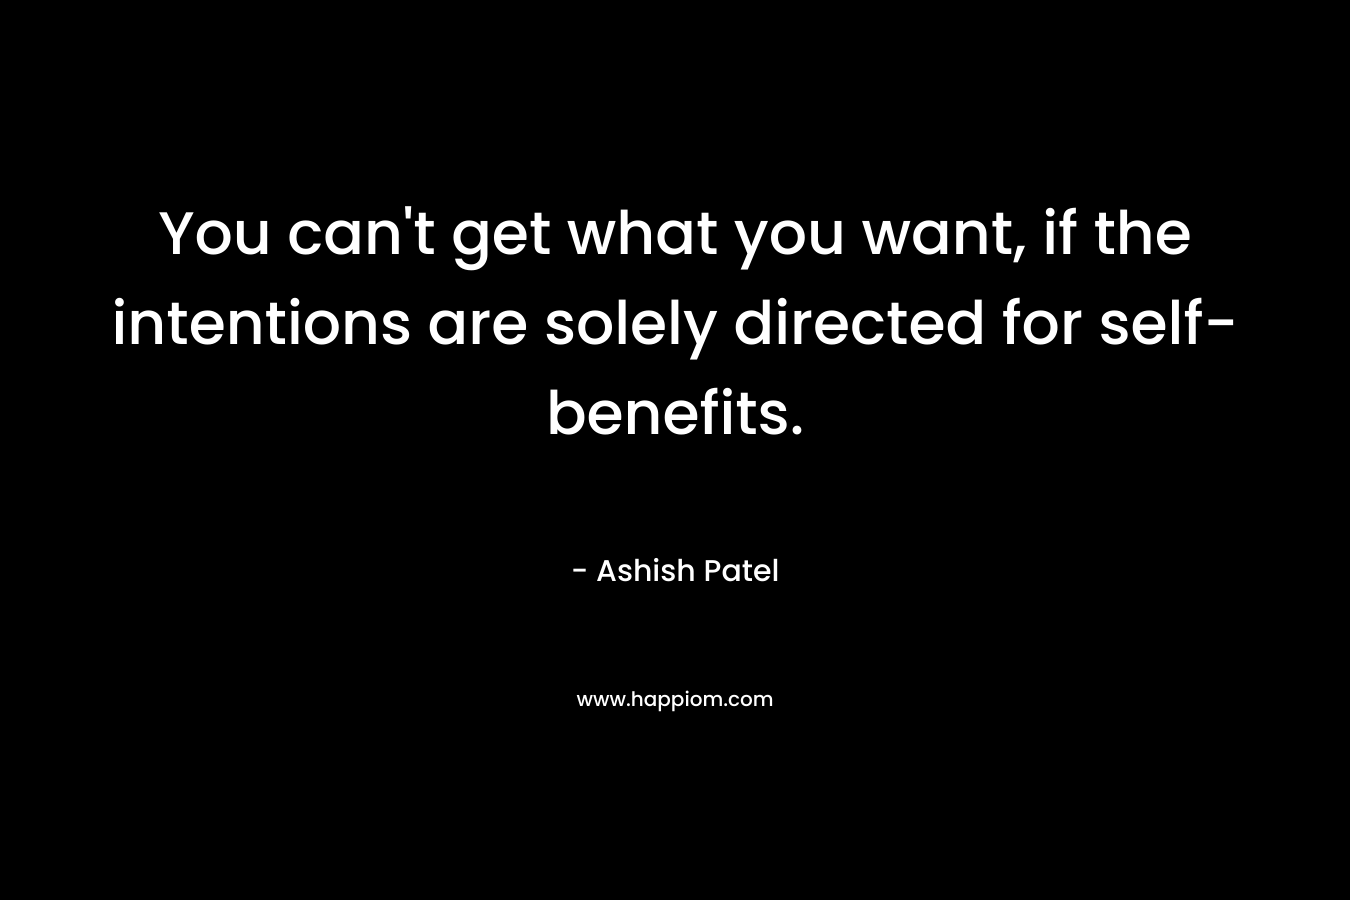 You can't get what you want, if the intentions are solely directed for self-benefits.